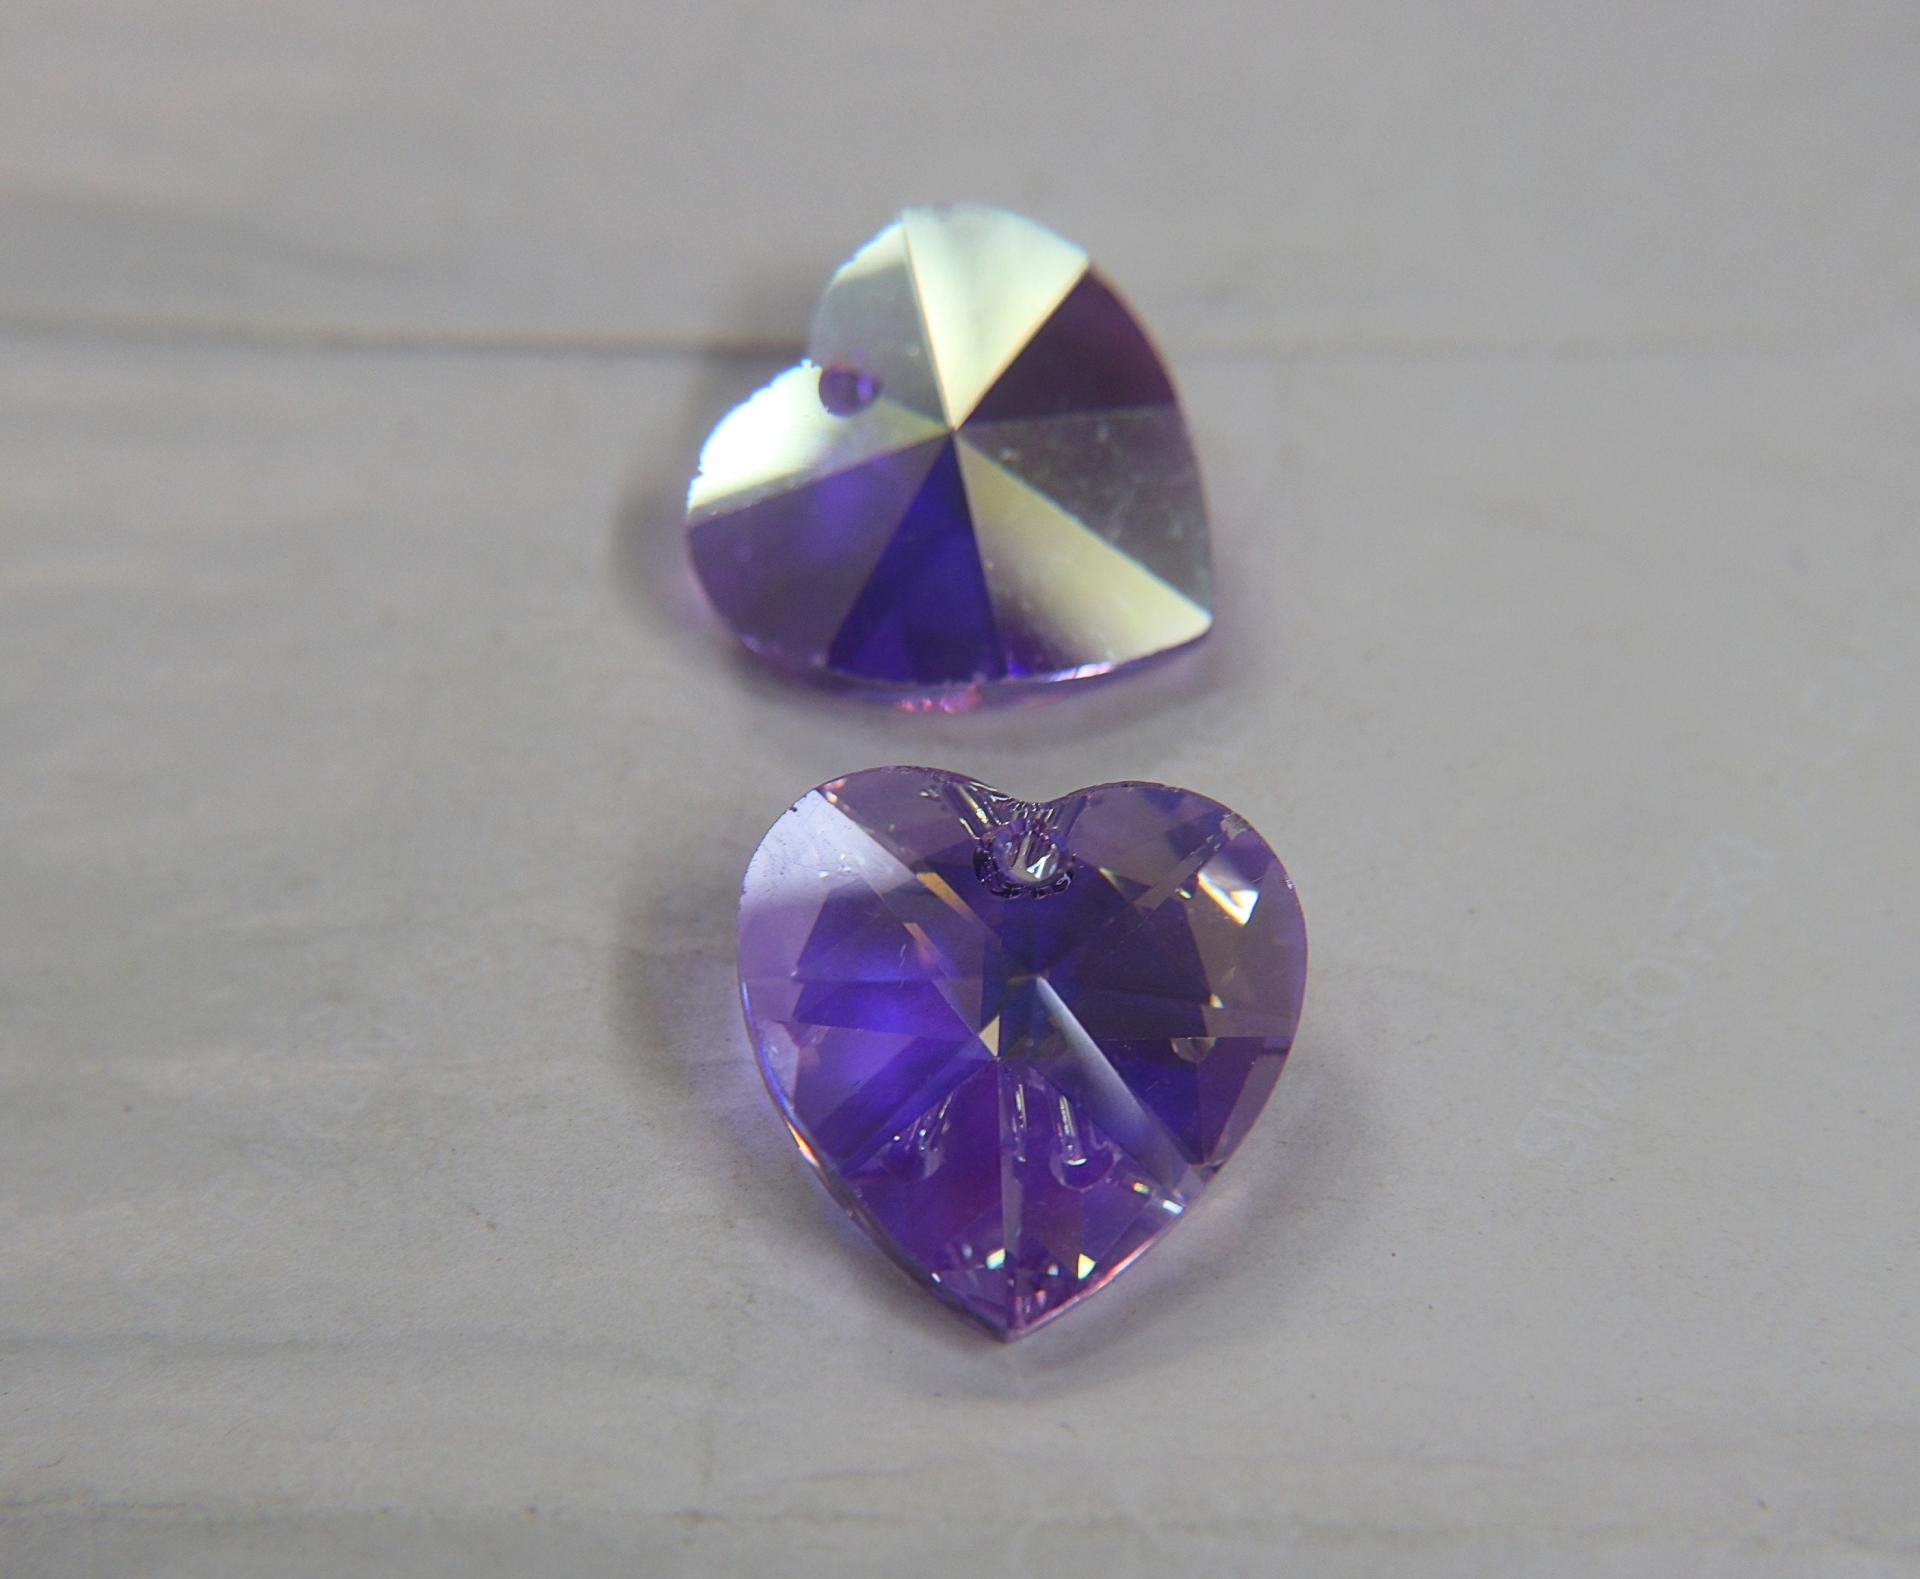 28 MM Swarovski Crystal Heart Pendant Beads 6202 Crystal drops in Crystal  AB /Violet AB vintage findings, jewelry making